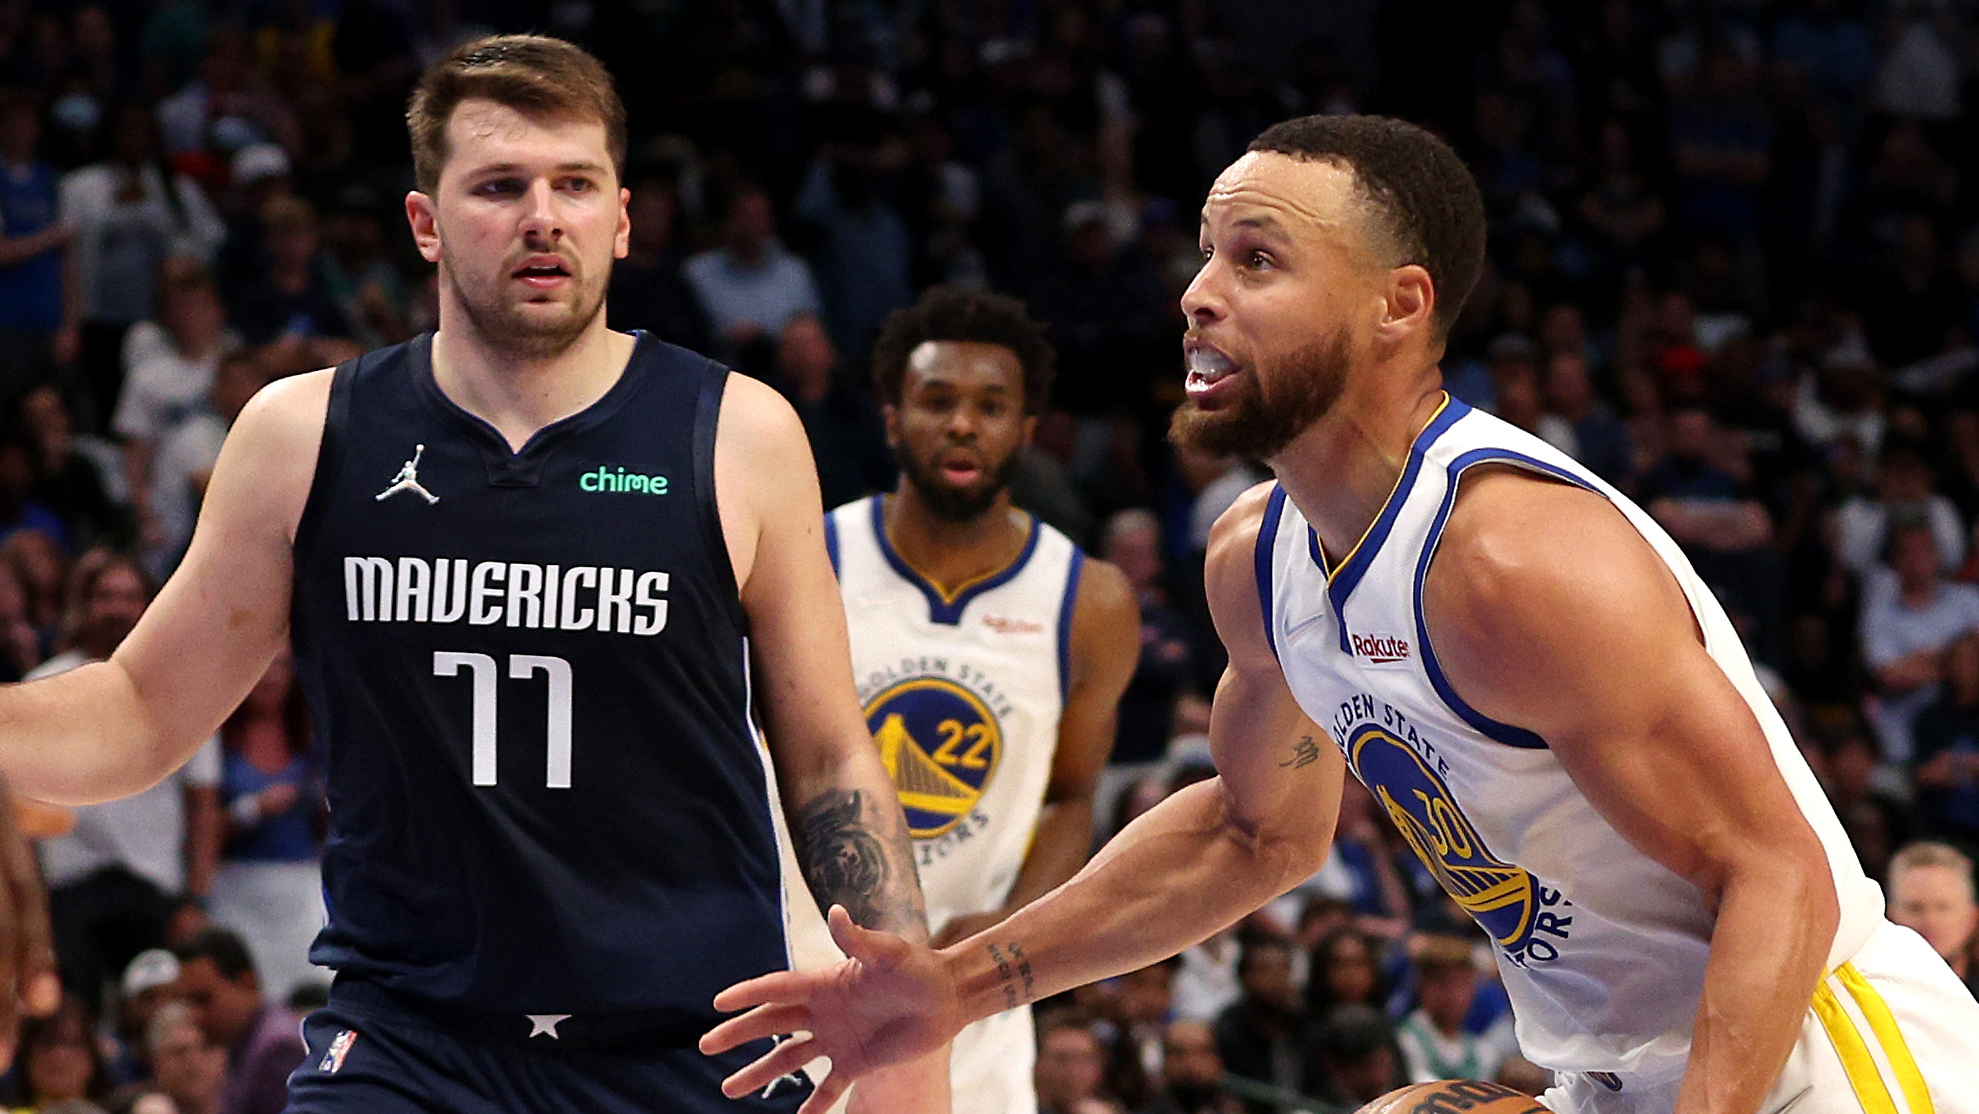 Warriors vs Mavericks live stream: How to watch game 4 of NBA Playoffs Western Conference Finals online right now